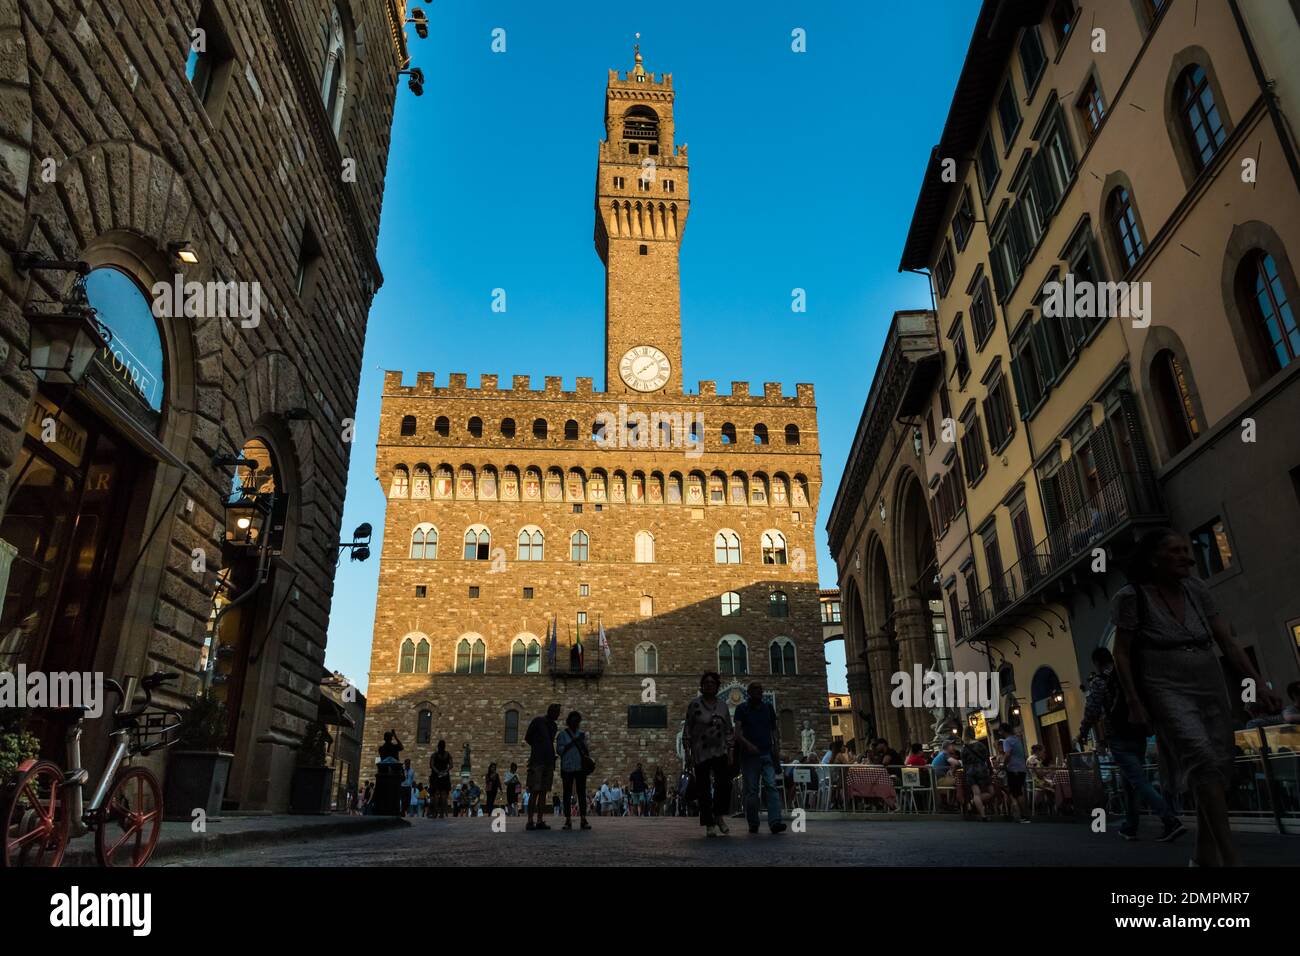 Lovely full view of the famous Palazzo Vecchio museum with the Arnolfo’s tower in the square Piazza della Signoria seen from the busy street Via... Stock Photo